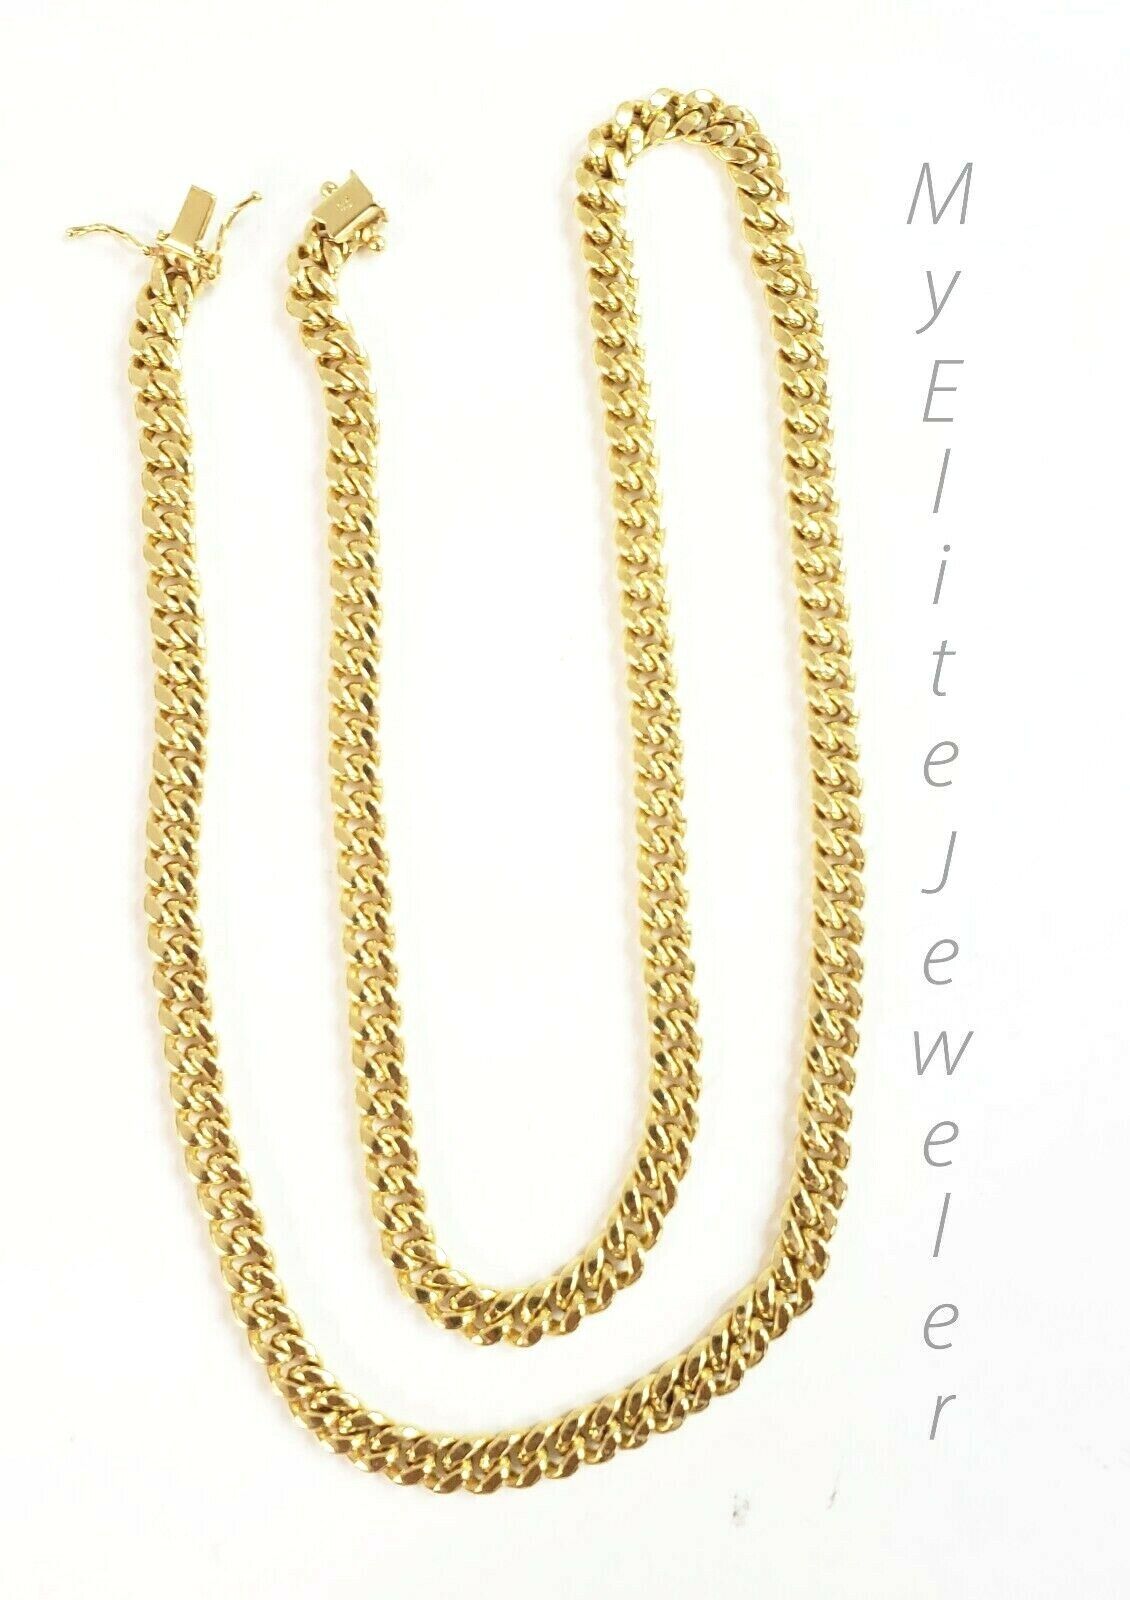 10k Yellow Gold Miami Cuban Link Chain necklace 6mm 26 inch Box Lock REAL 10KT